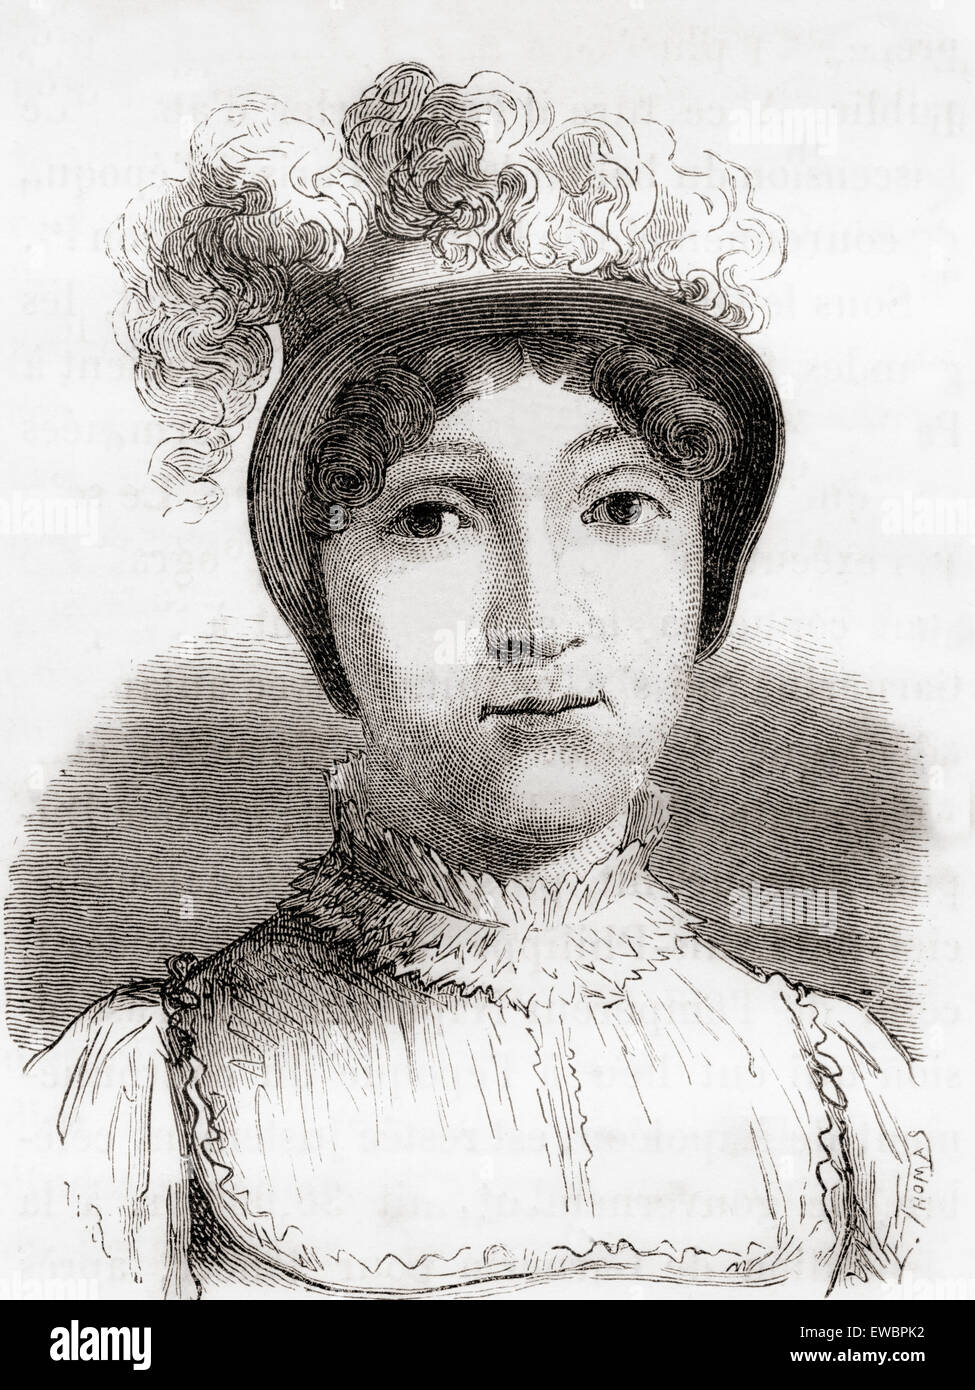 Sophie Blanchard, aka Madame Blanchard, 1778 – 1819.  French aeronaut and the wife of ballooning pioneer Jean-Pierre Blanchard. Blanchard was the first woman to work as a professional balloonist and the first woman to be killed in an aviation accident. Stock Photo